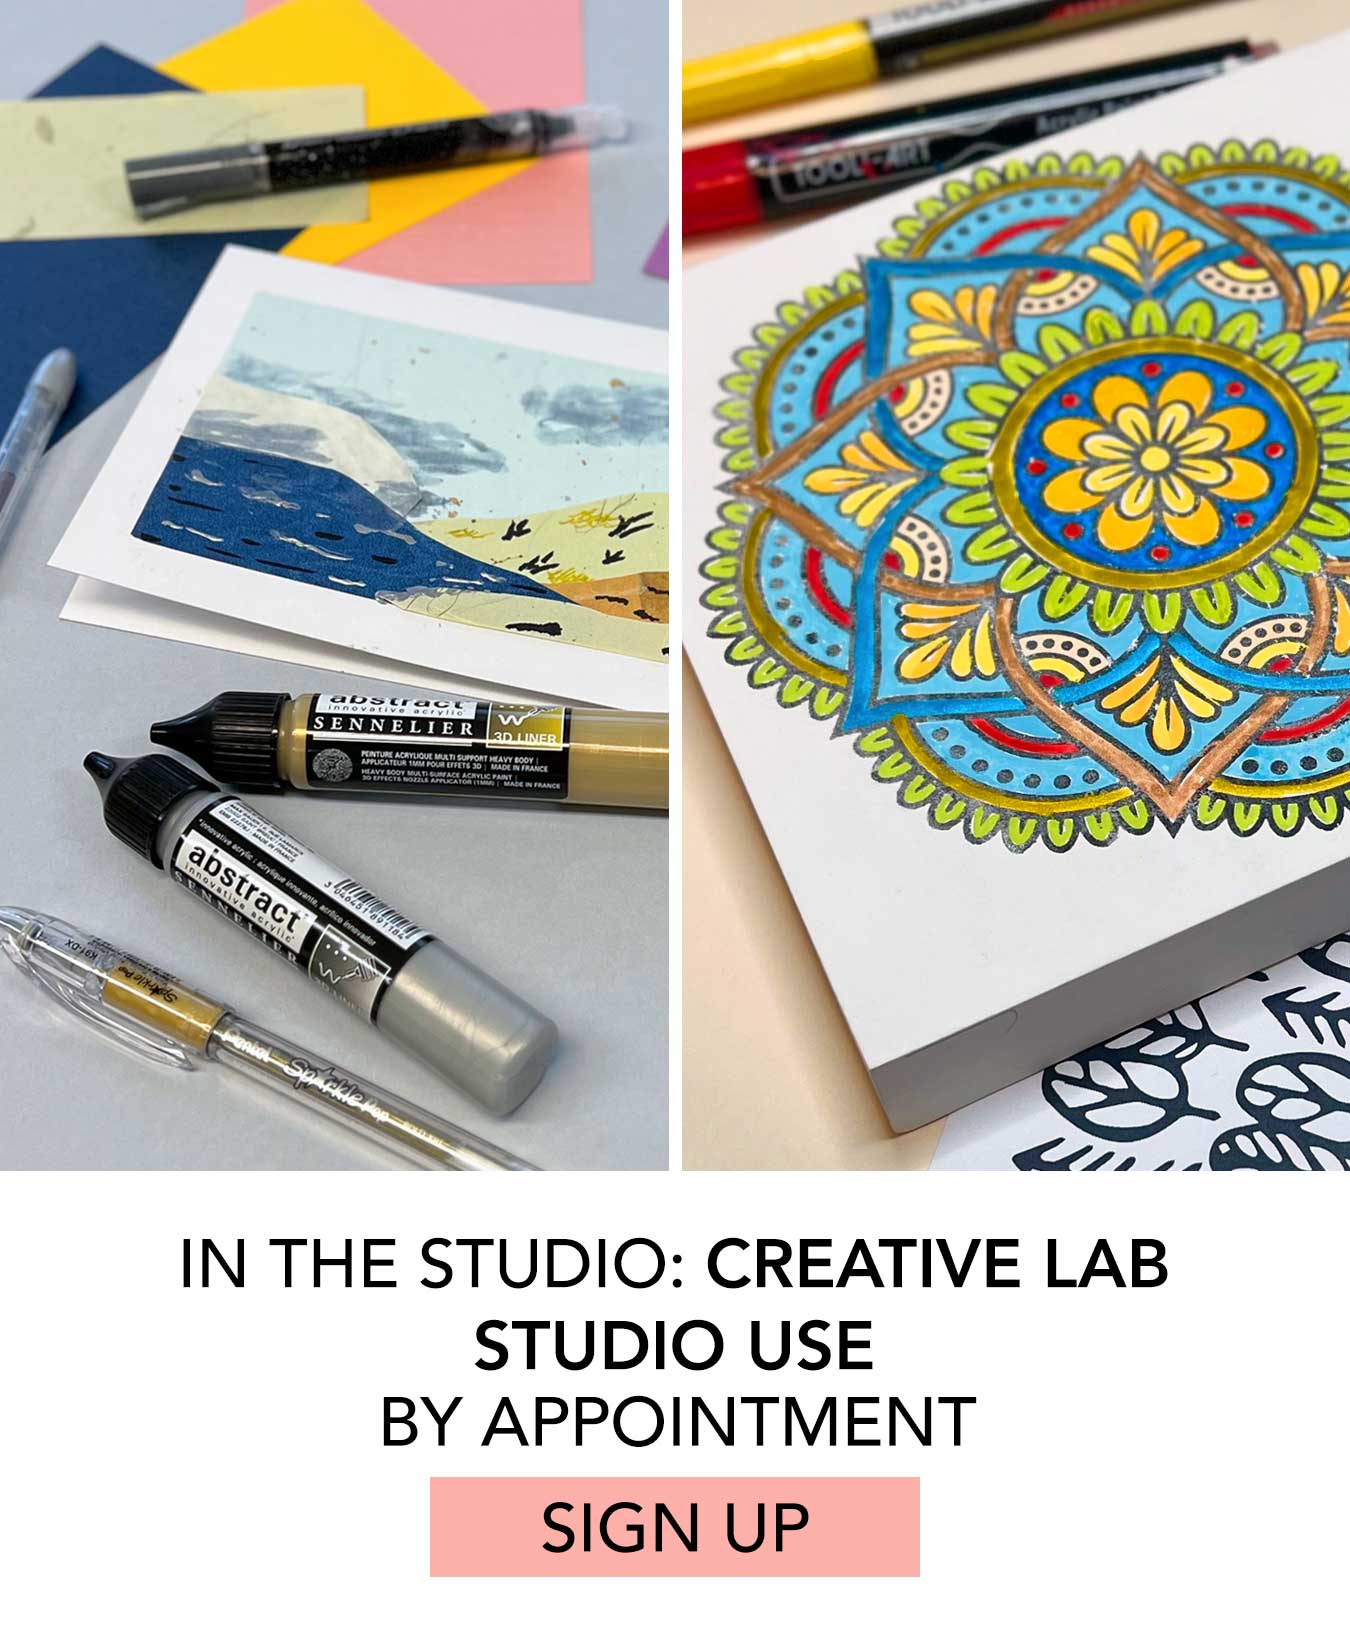 In Studio: Creative Lab Studio Use. Click to Sign Up.